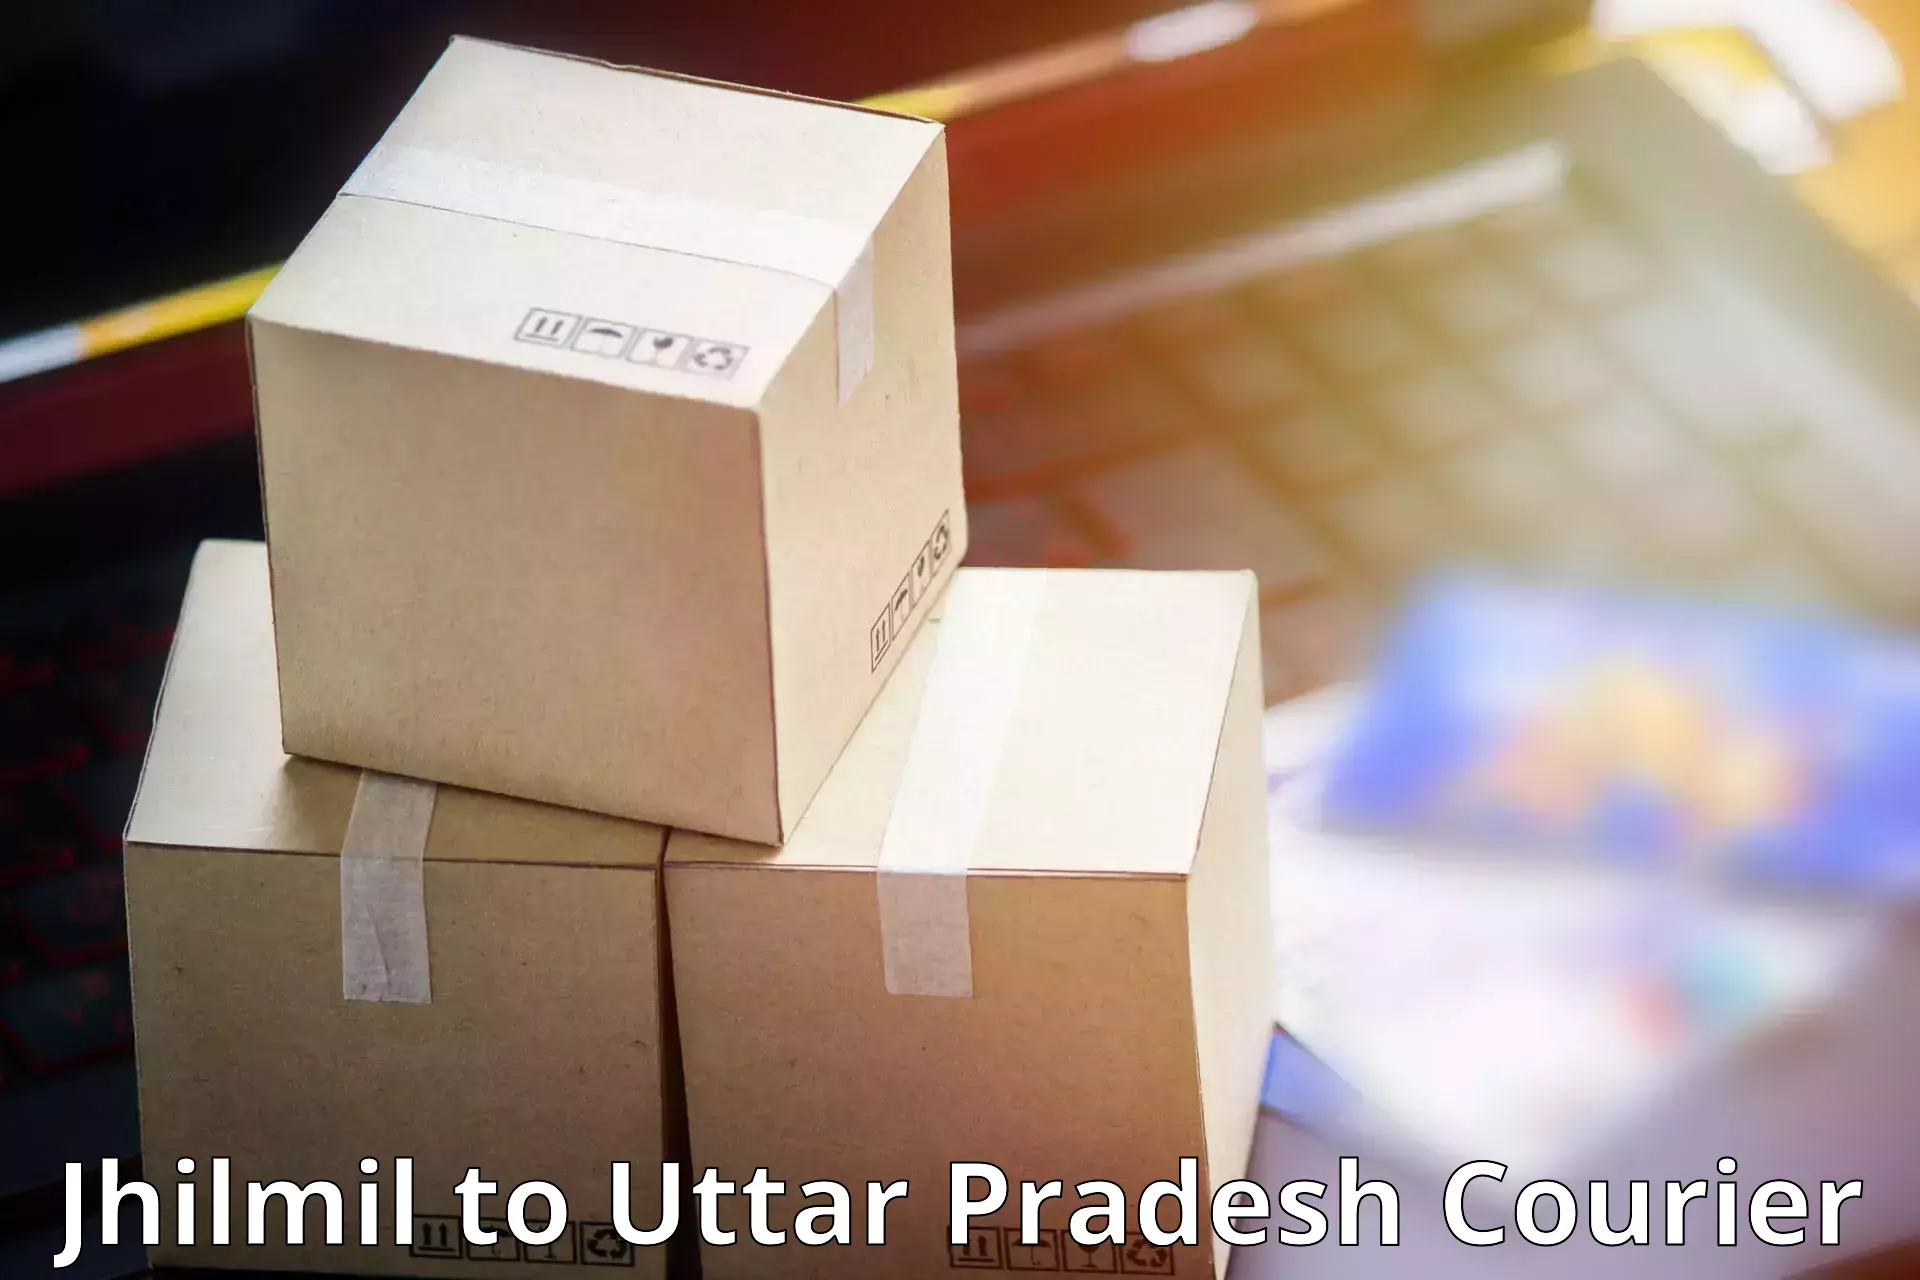 24/7 courier service Jhilmil to Maripeda